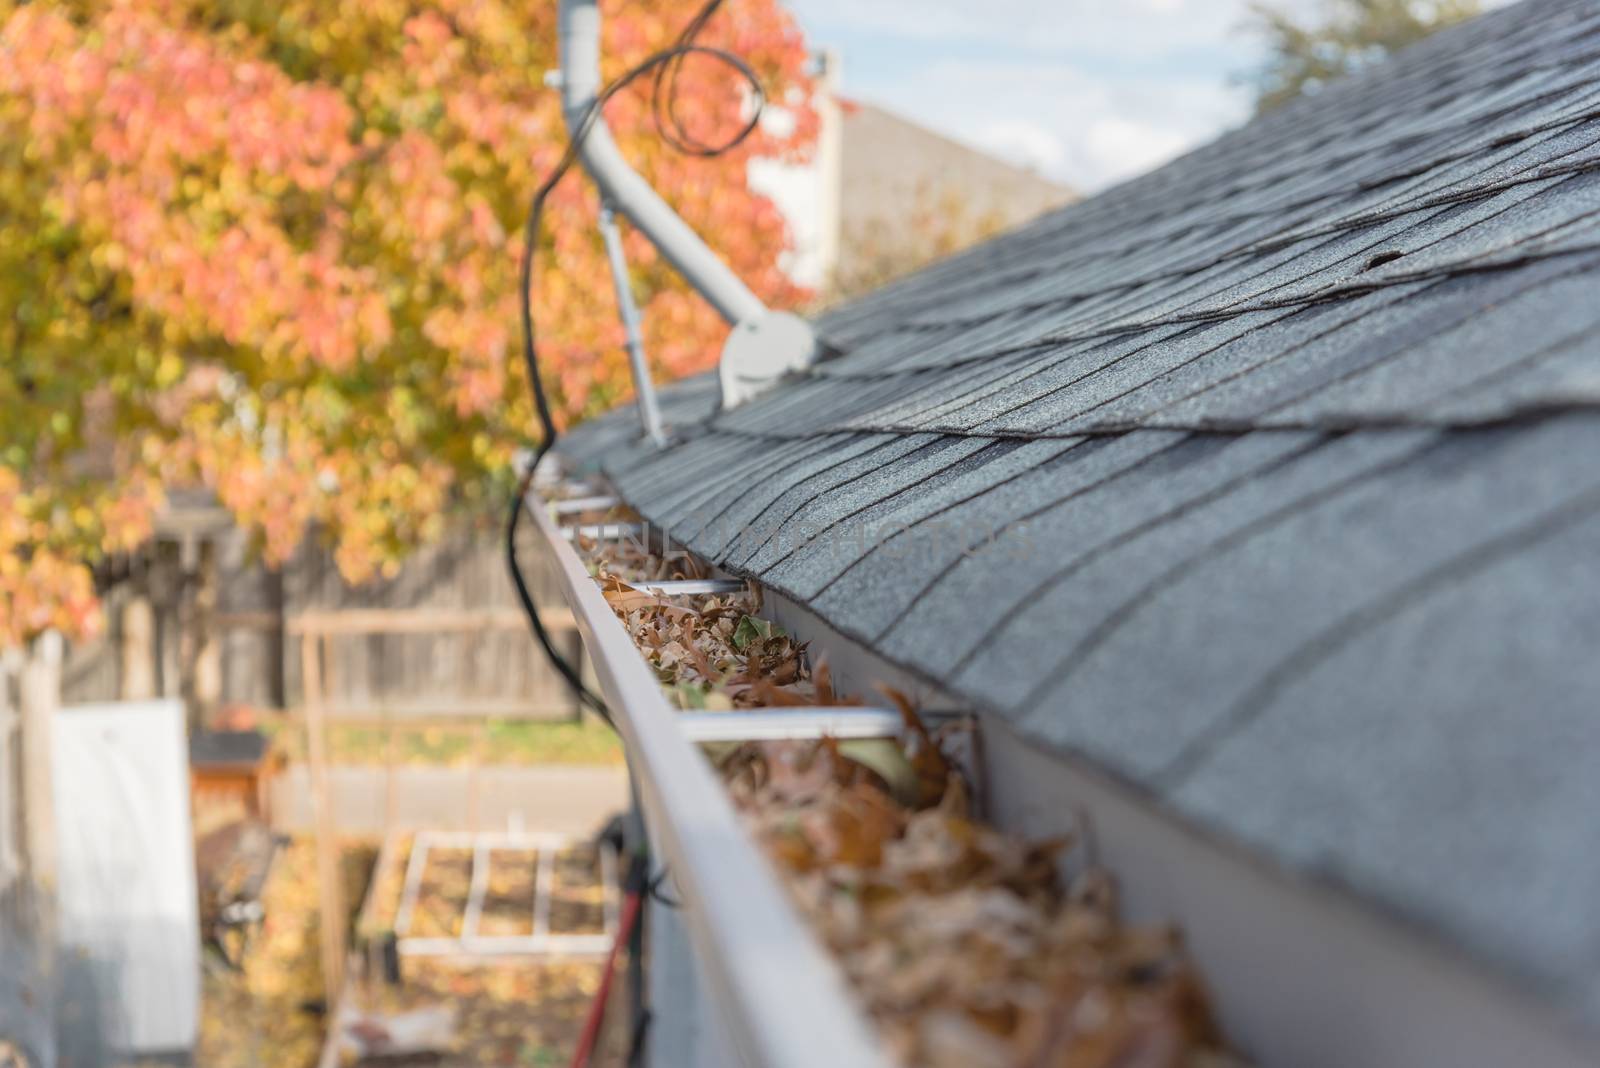 Clogged gutter near roof shingles with colorful fall foliage in background by trongnguyen